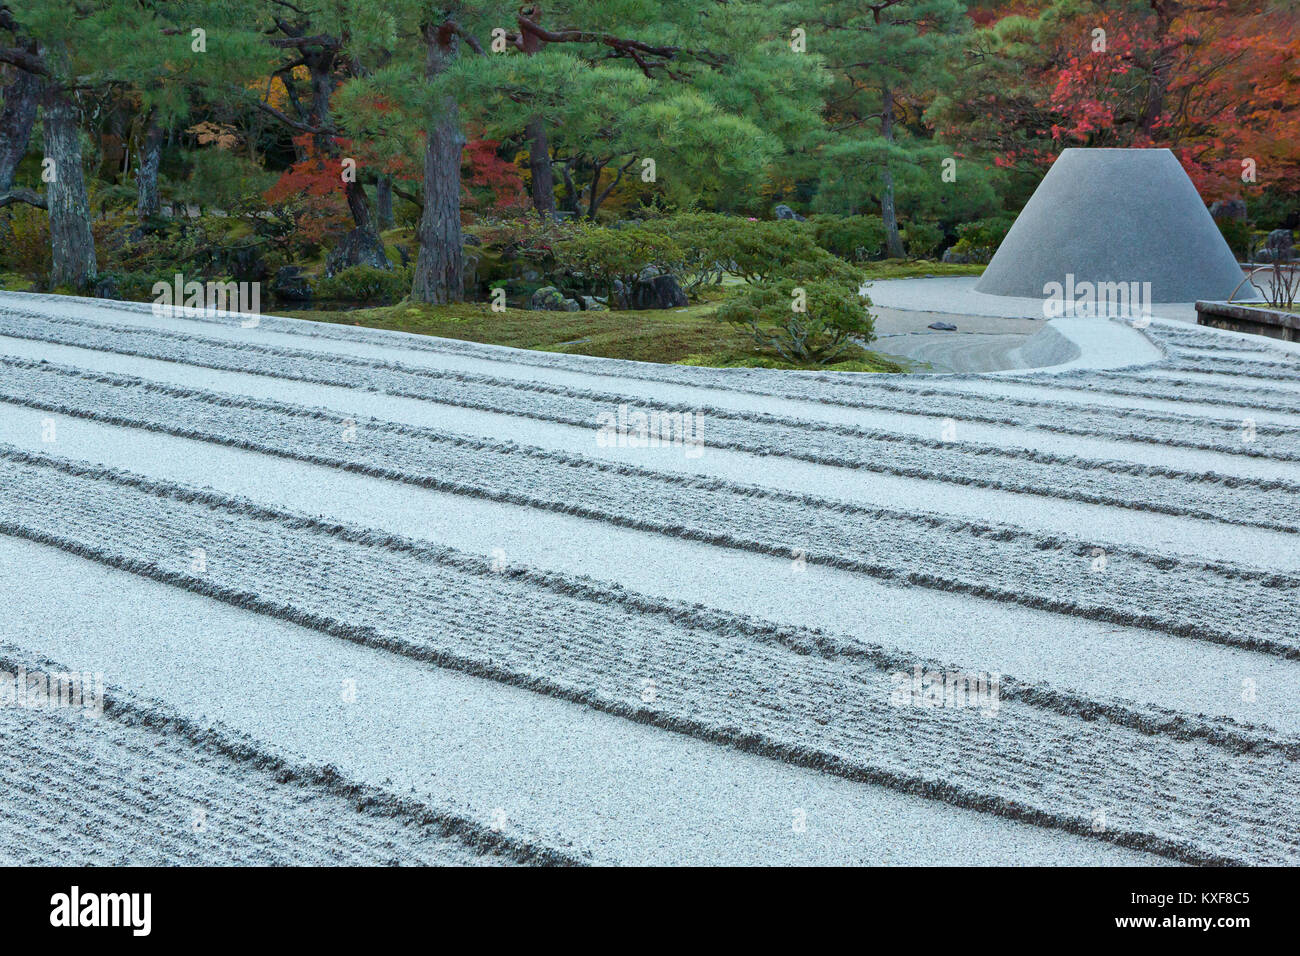 Flat Garden textures at the Ginkakuji Temple in Kyoto, Japan in the fall. Stock Photo